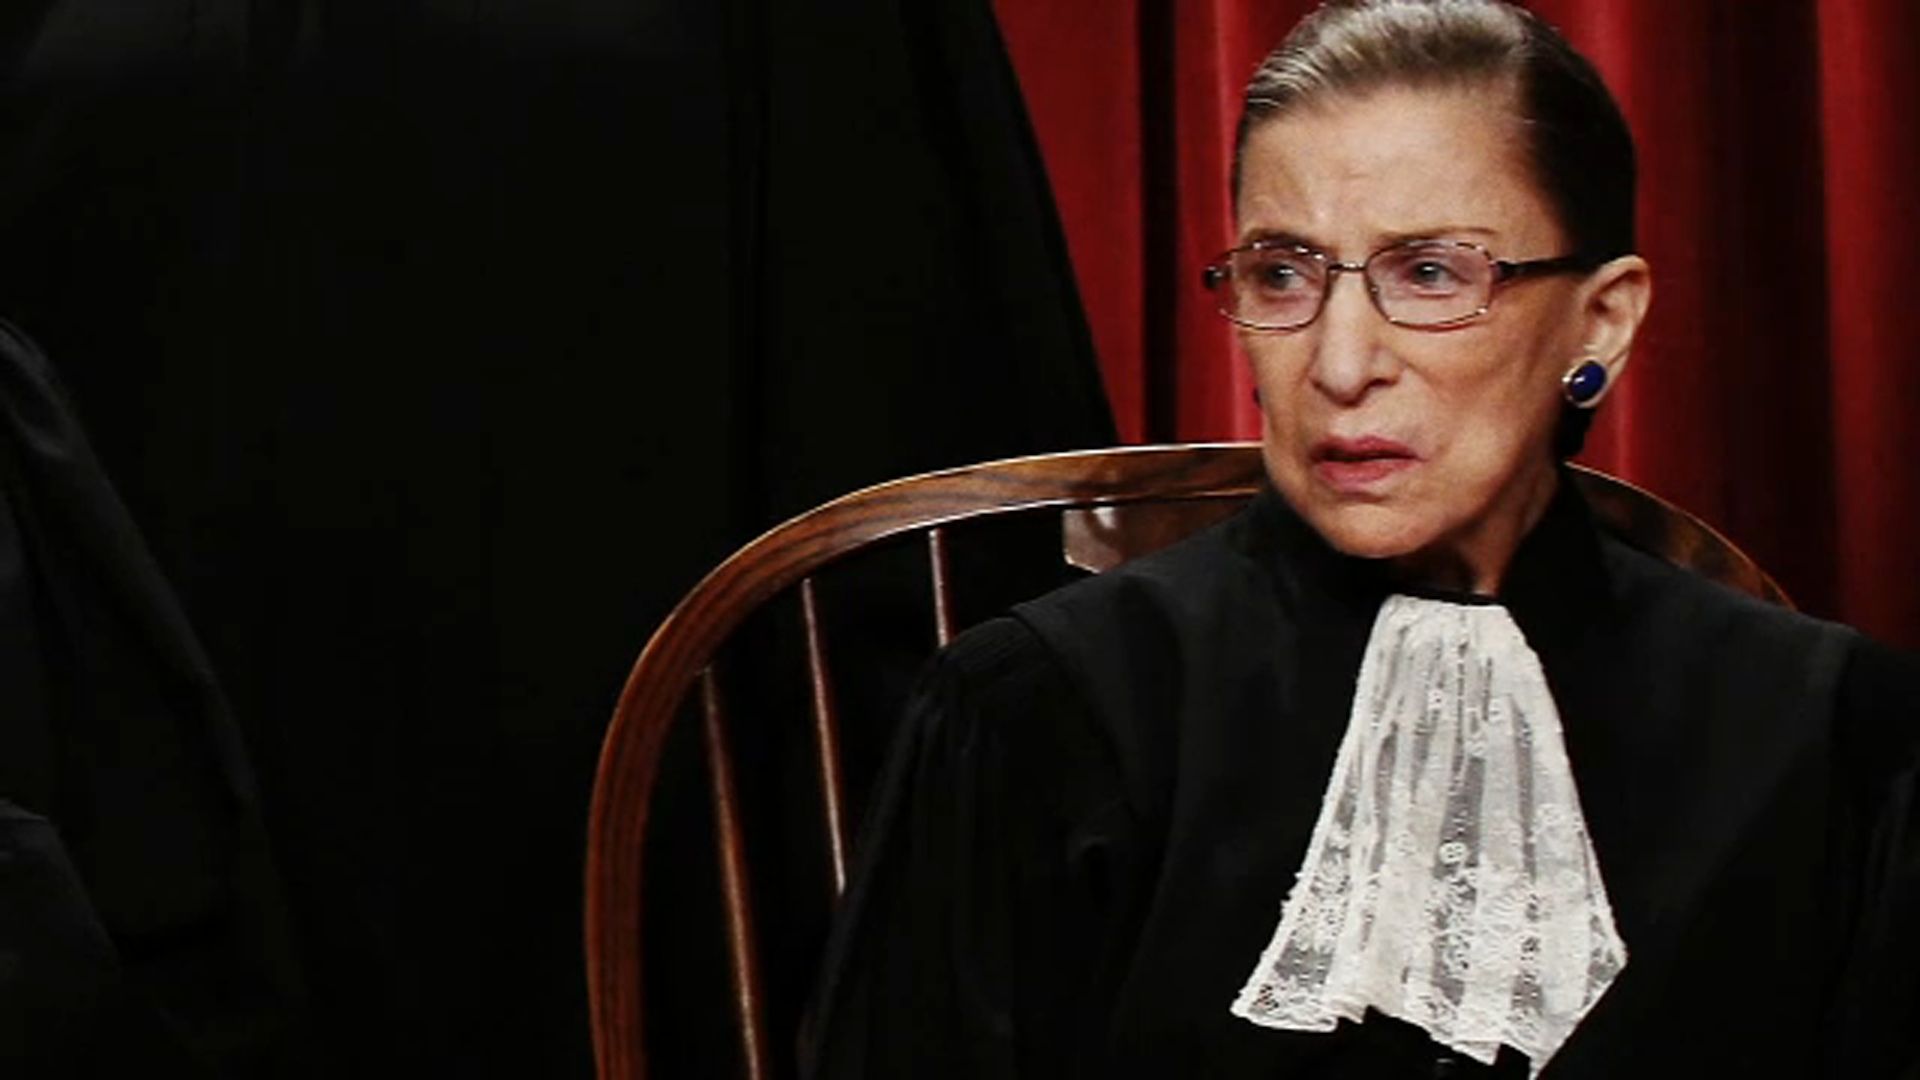 Justice Ruth Bader Ginsburg dead at 87 of cancer complications, Supreme Court says New York